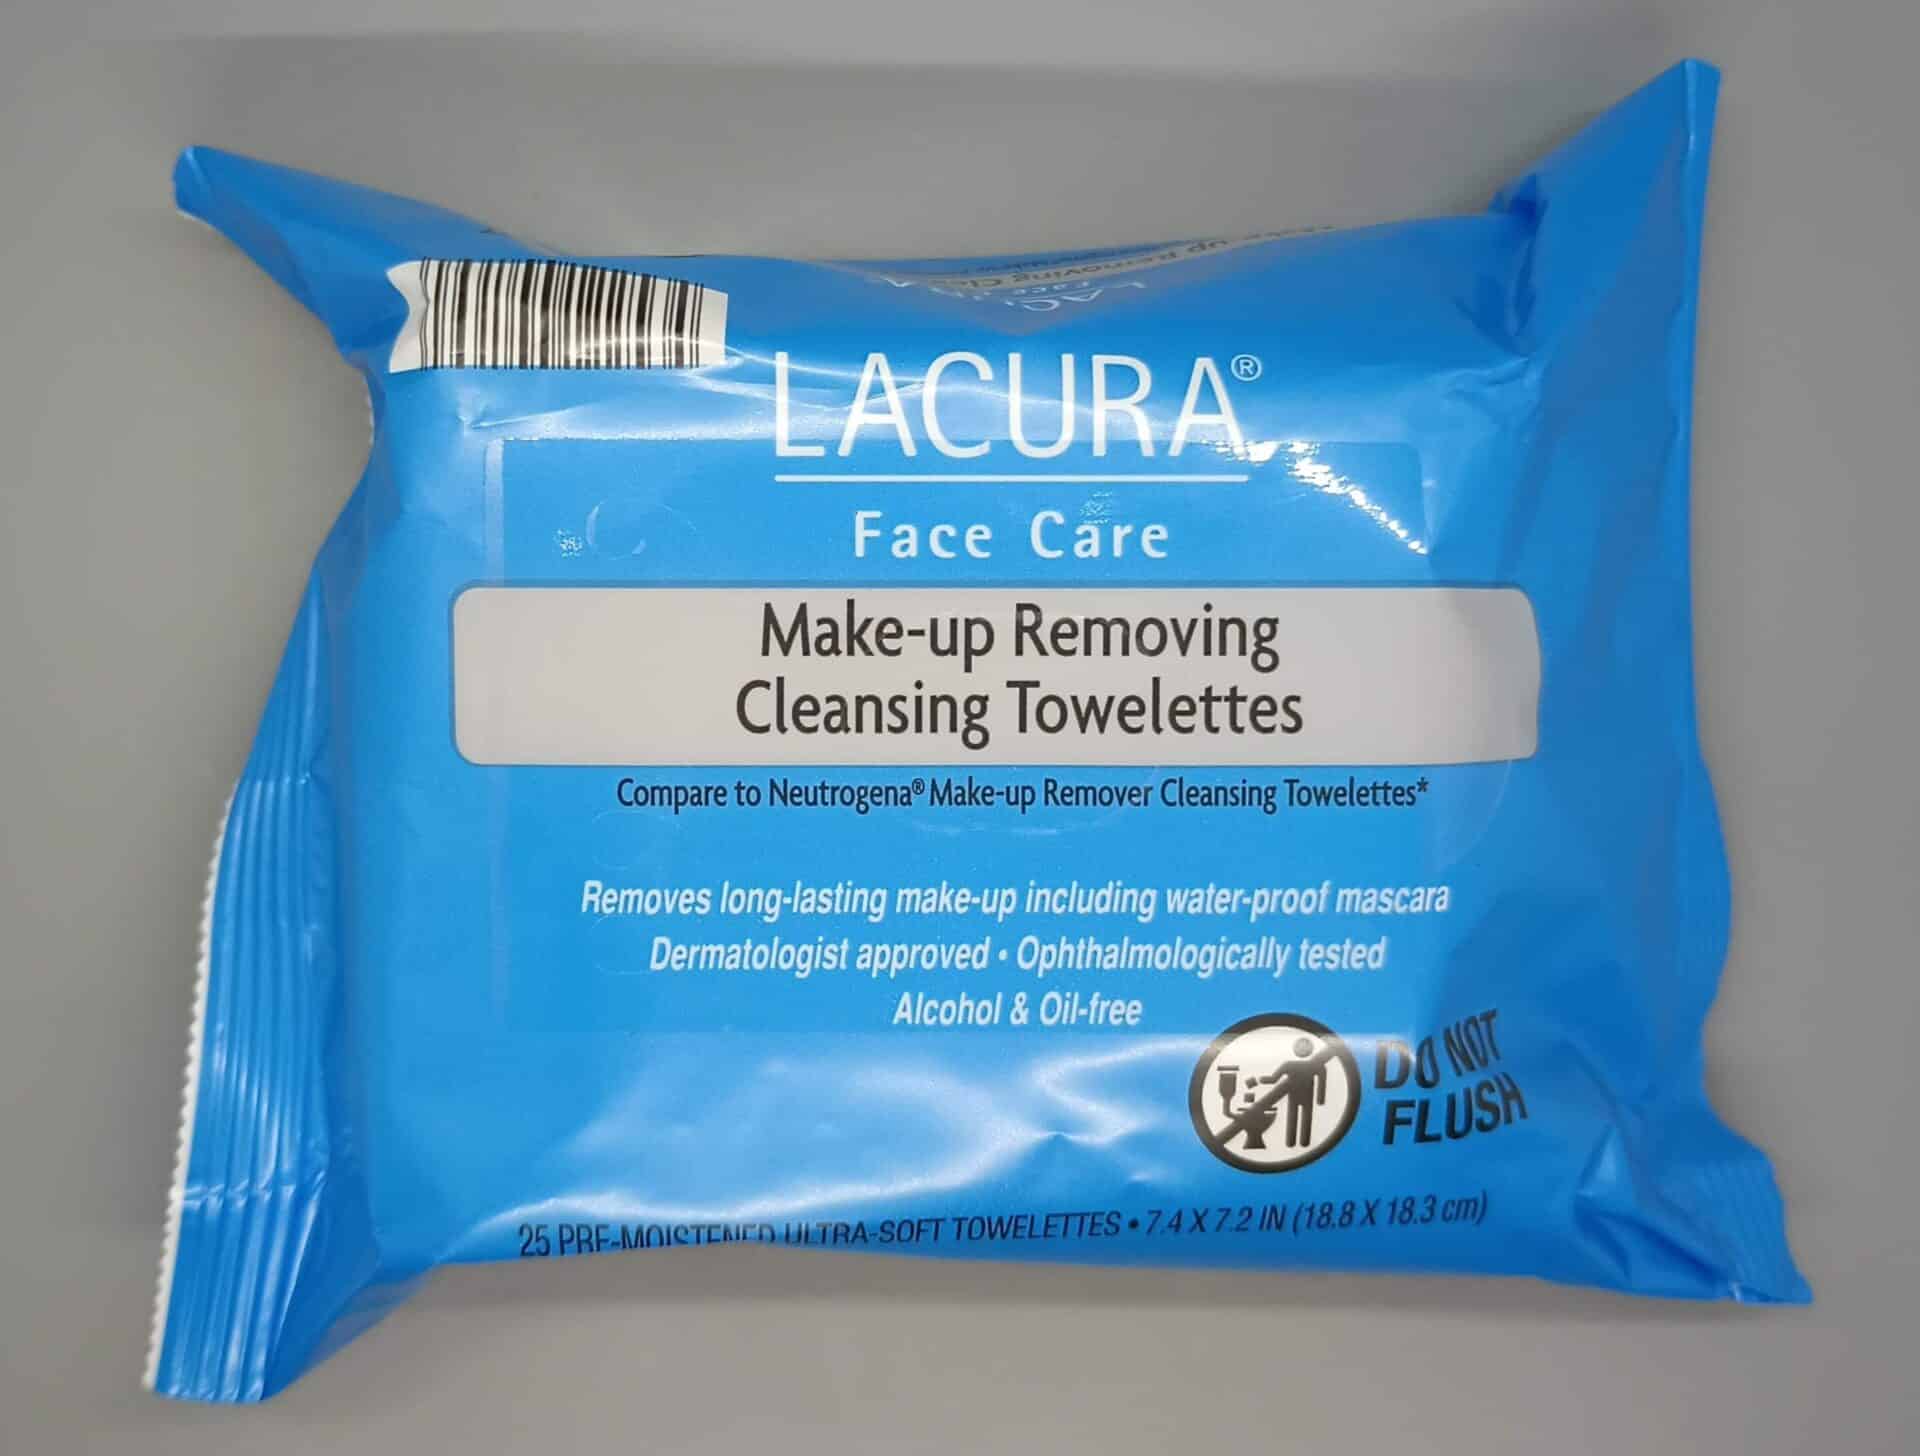 Lacura Face Care Make-Up Removing Cleansing Towelettes